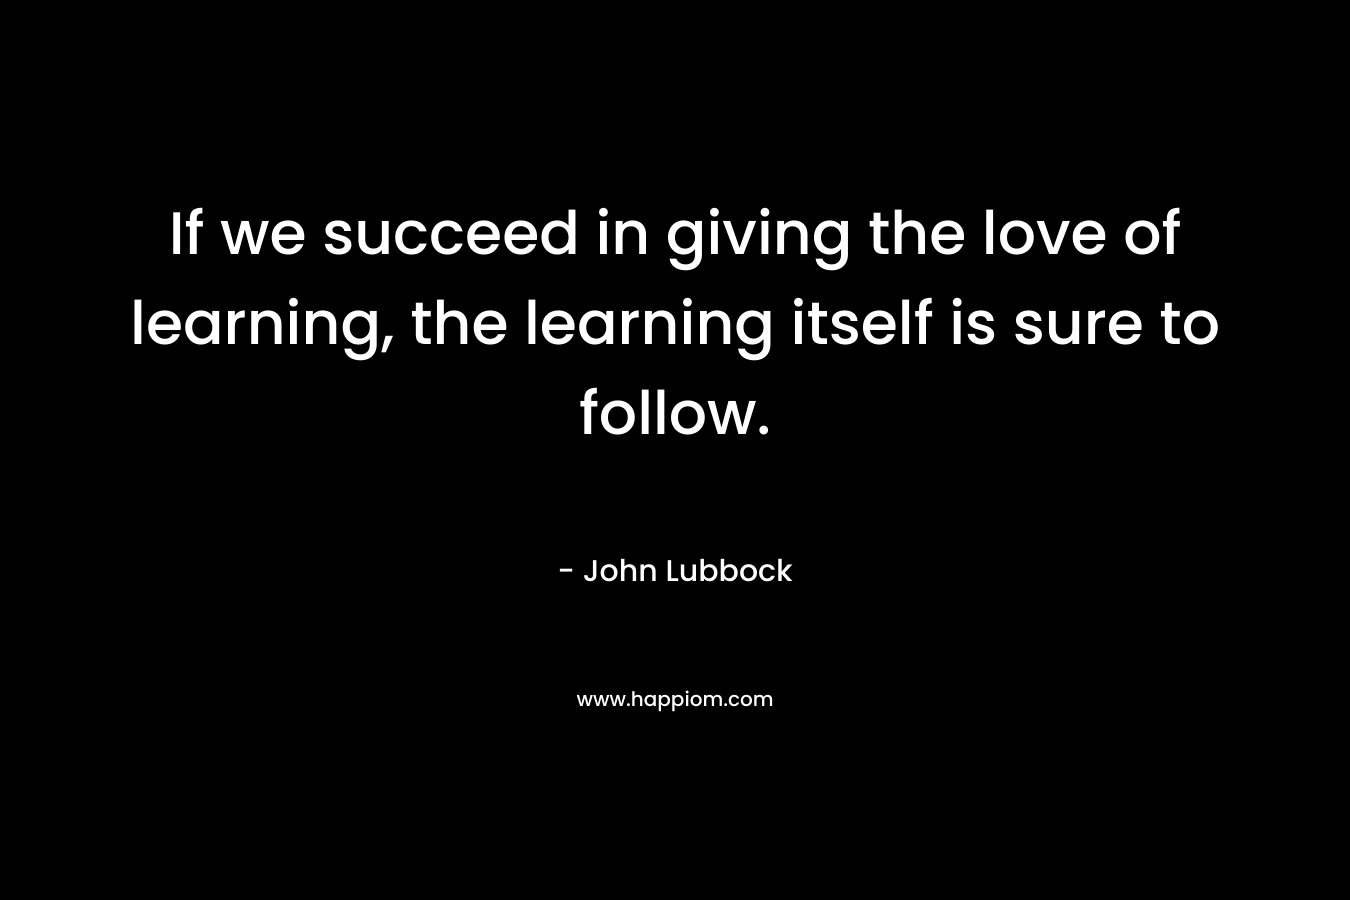 If we succeed in giving the love of learning, the learning itself is sure to follow.